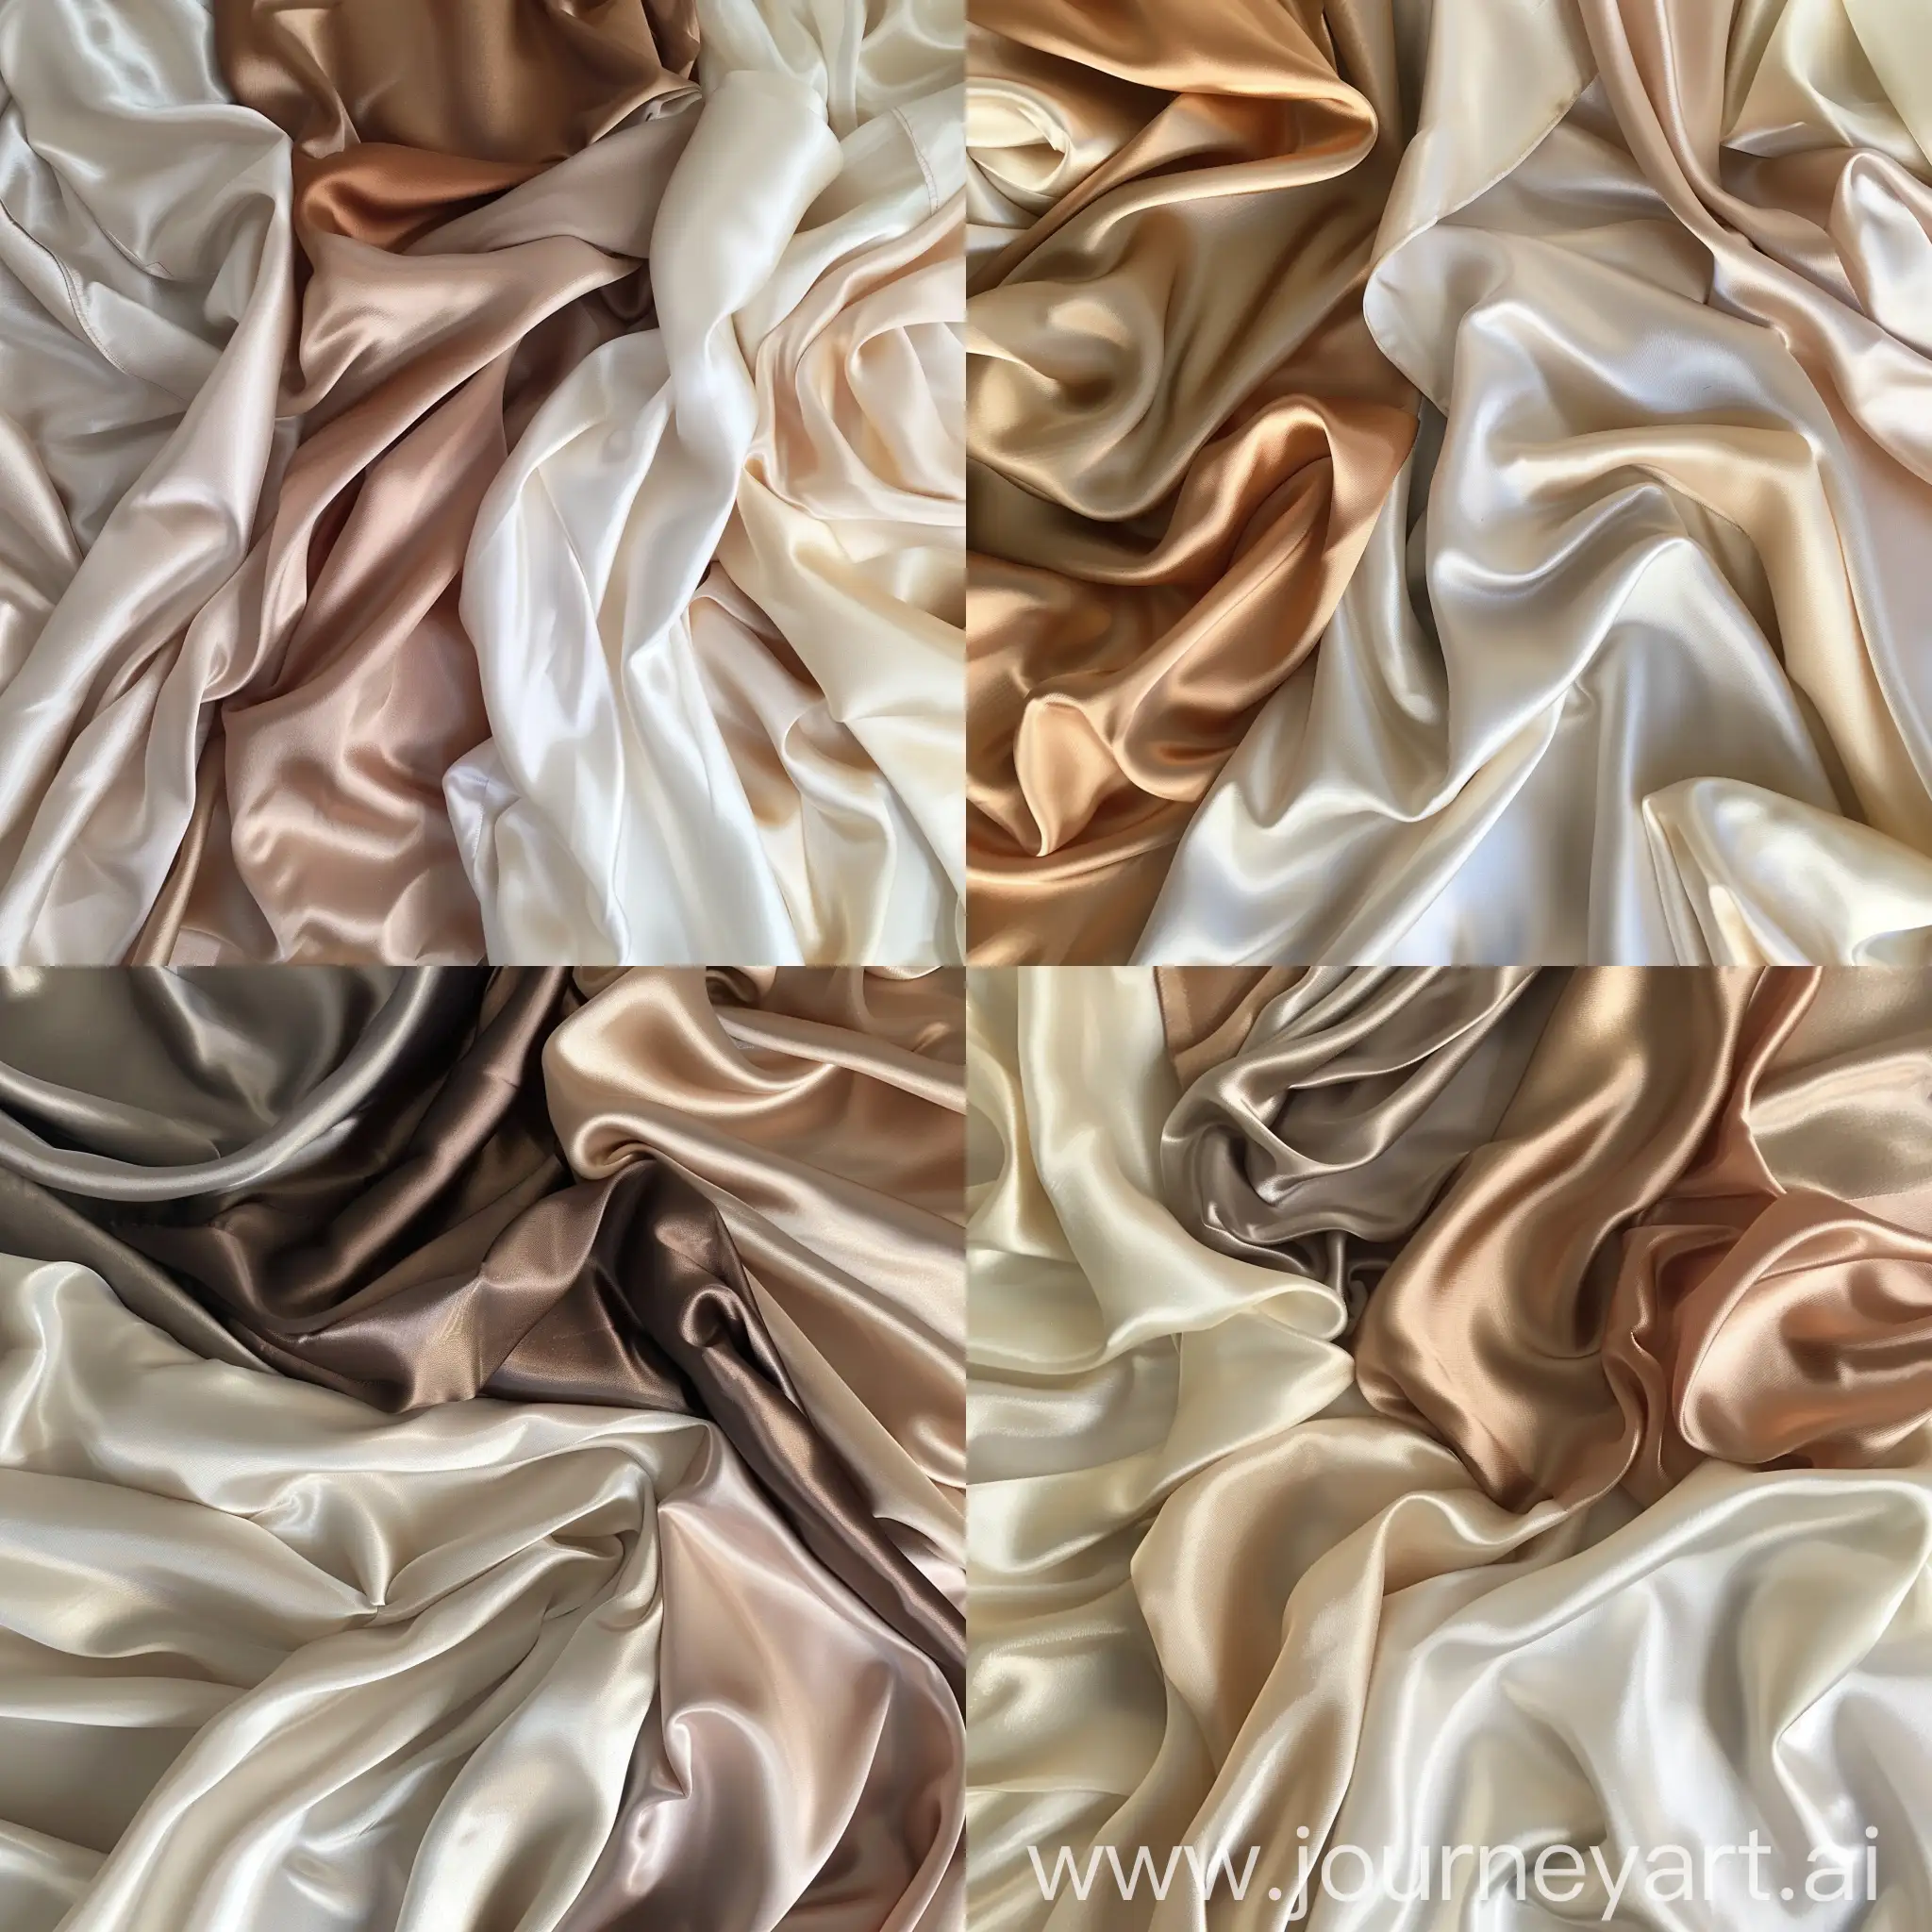 satin chaotically lying fabrics in light bordo beige and almond colors
